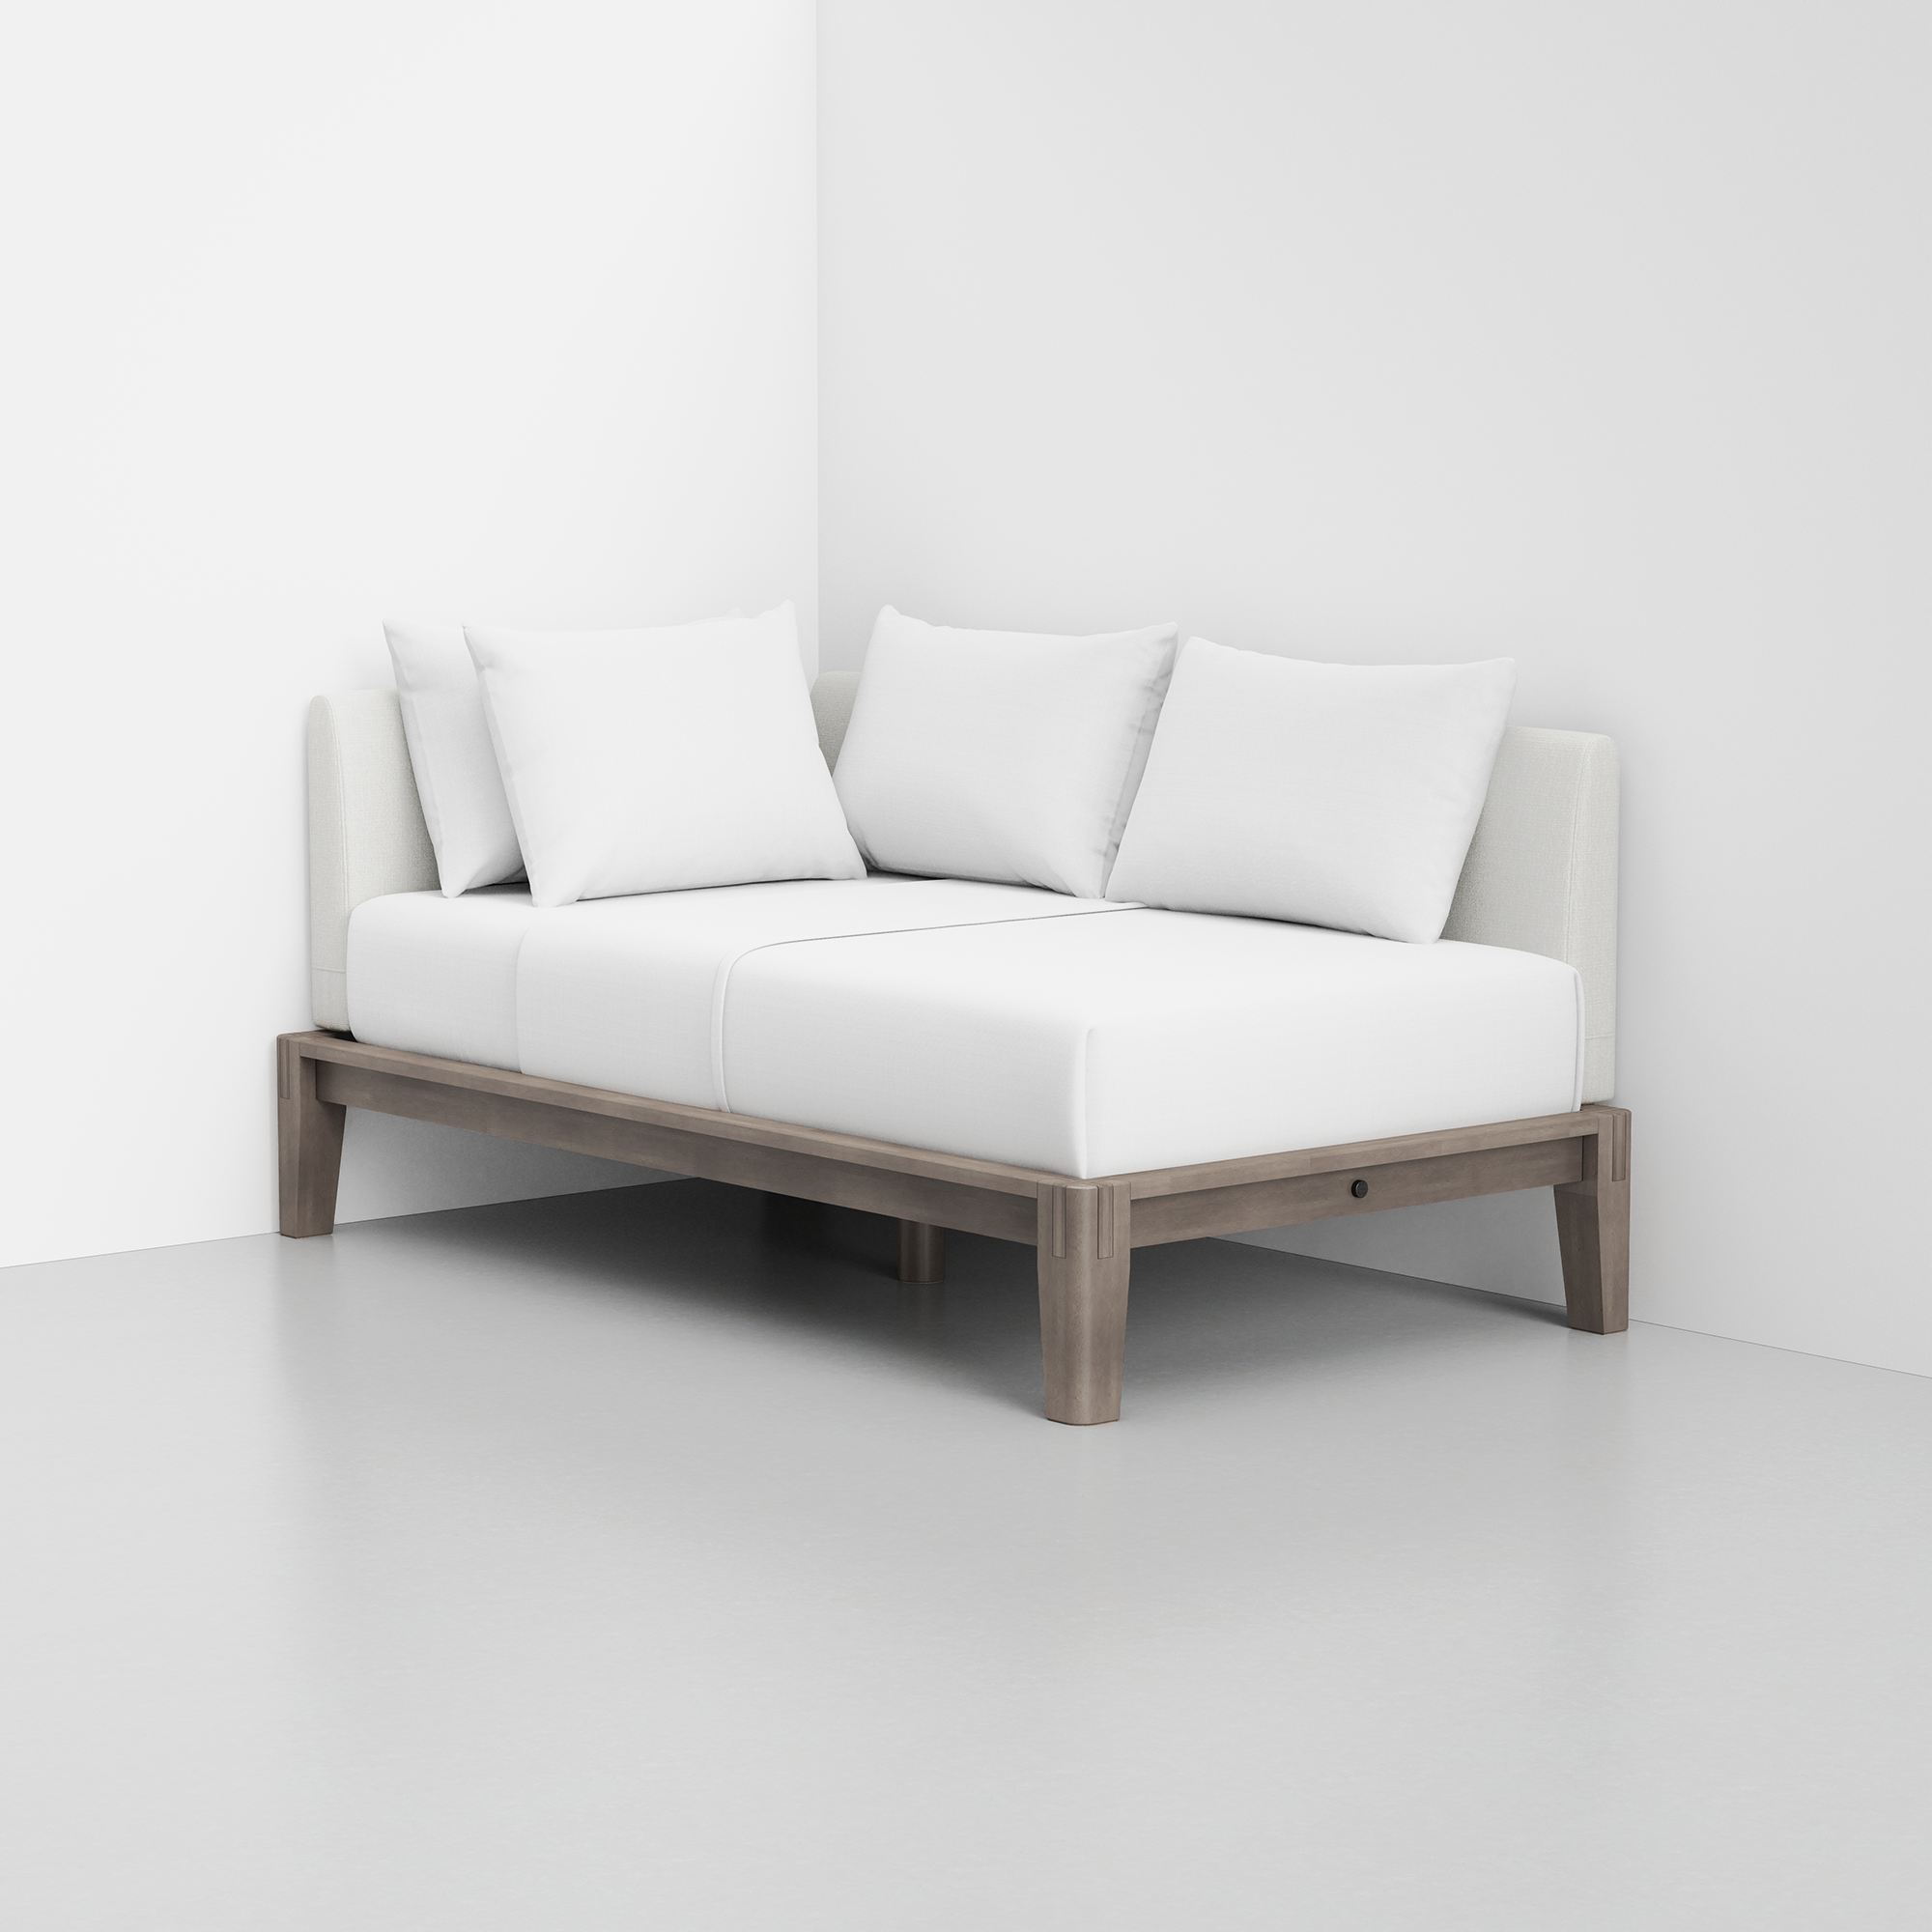 PDP Image: The Daybed (Grey / Light Linen) - Rendering - Pillow